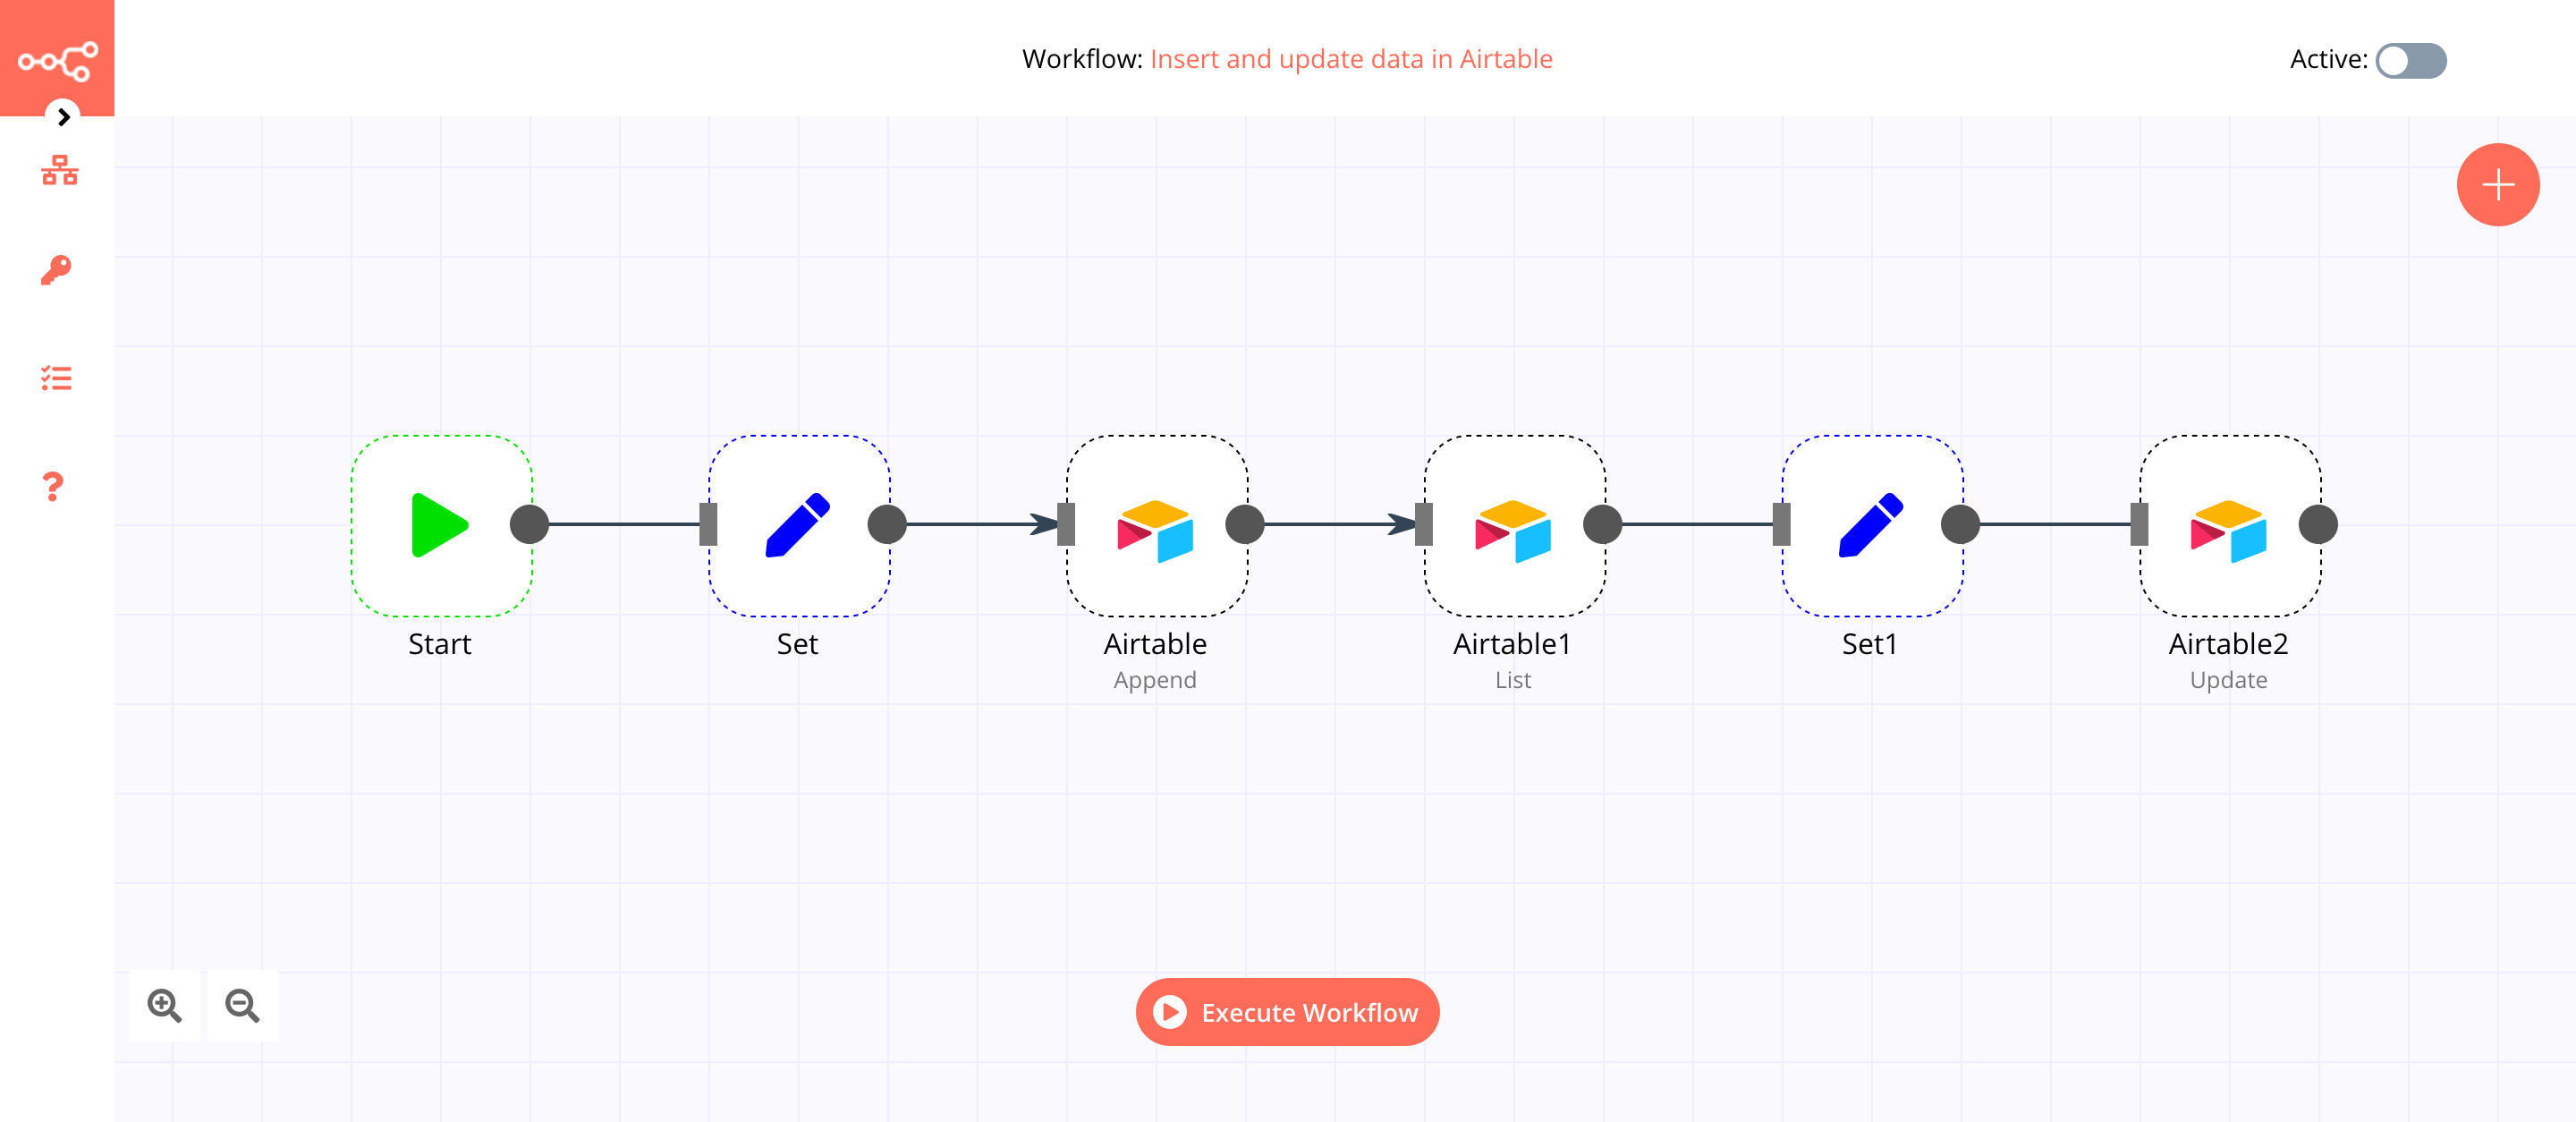 A workflow with the Airtable node